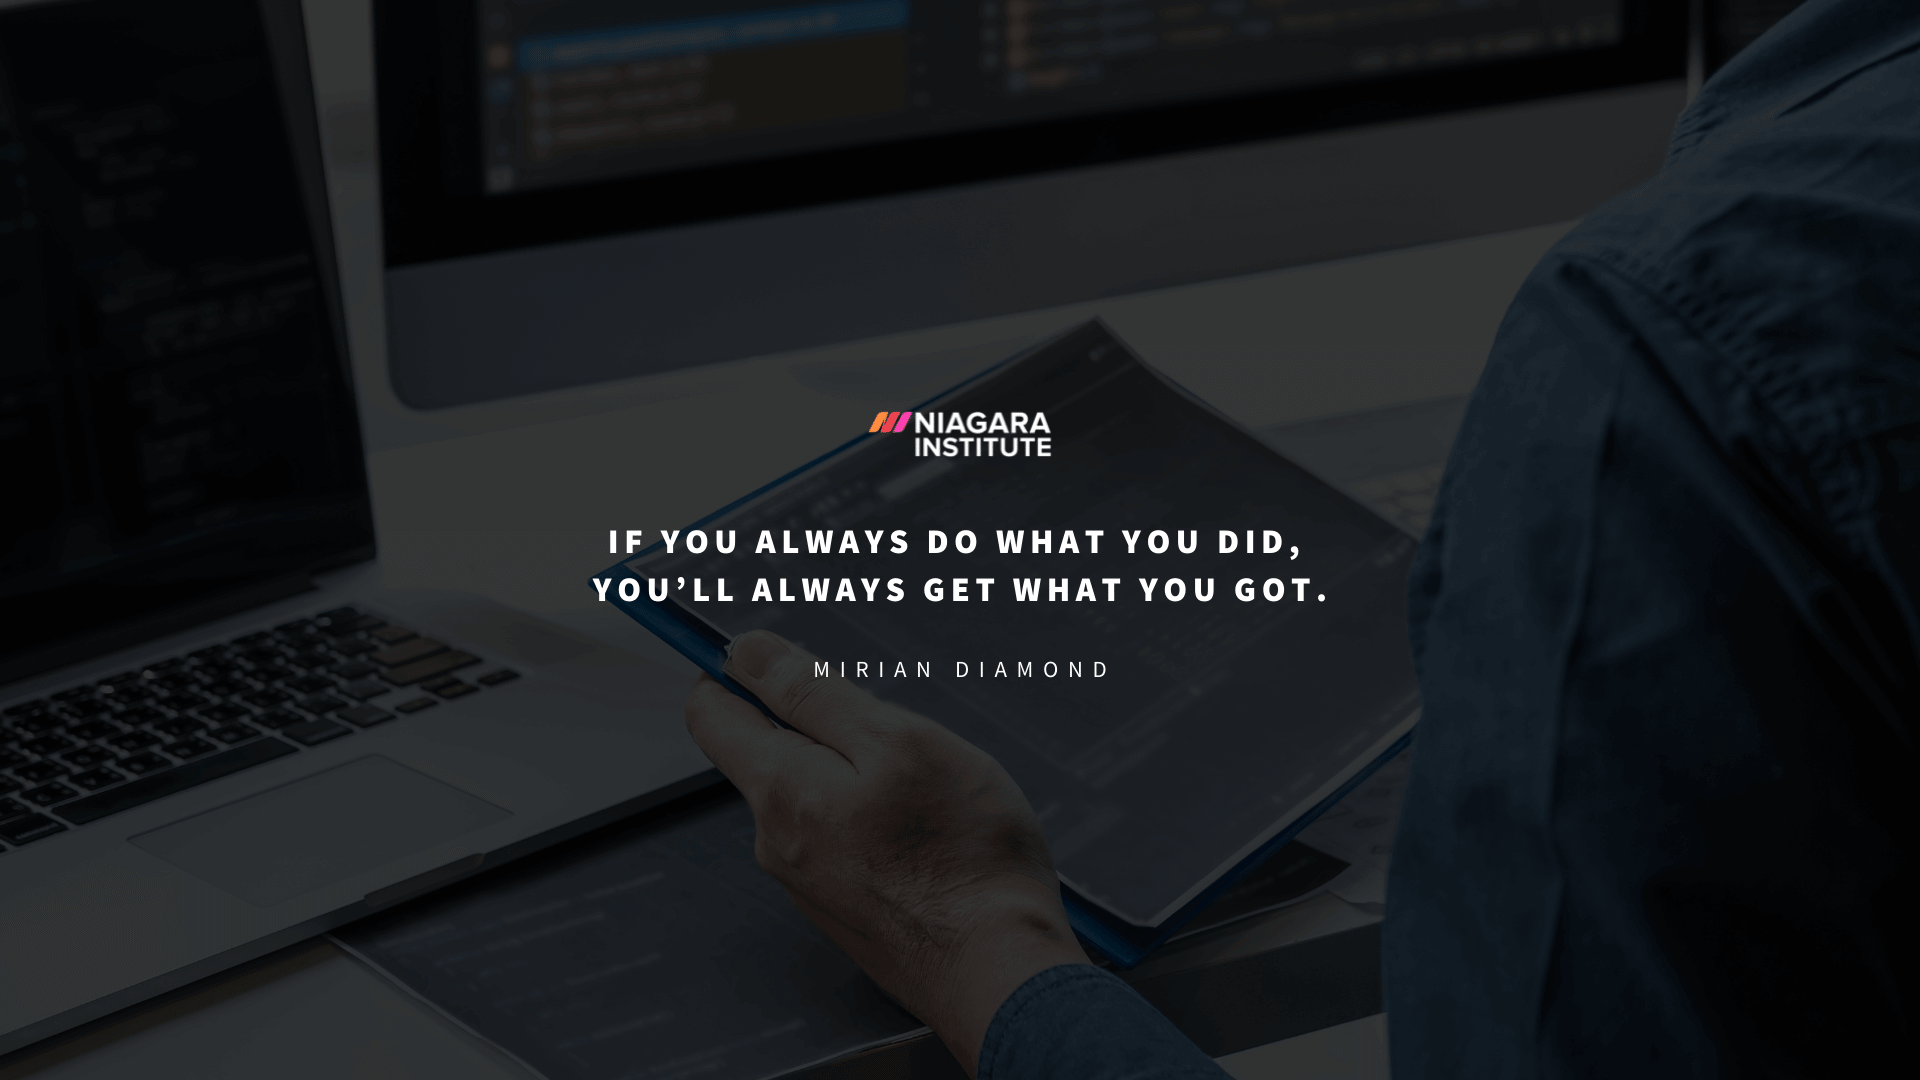 Quotes About Improving Processes If you always do what you did, you’ll always get what you got.